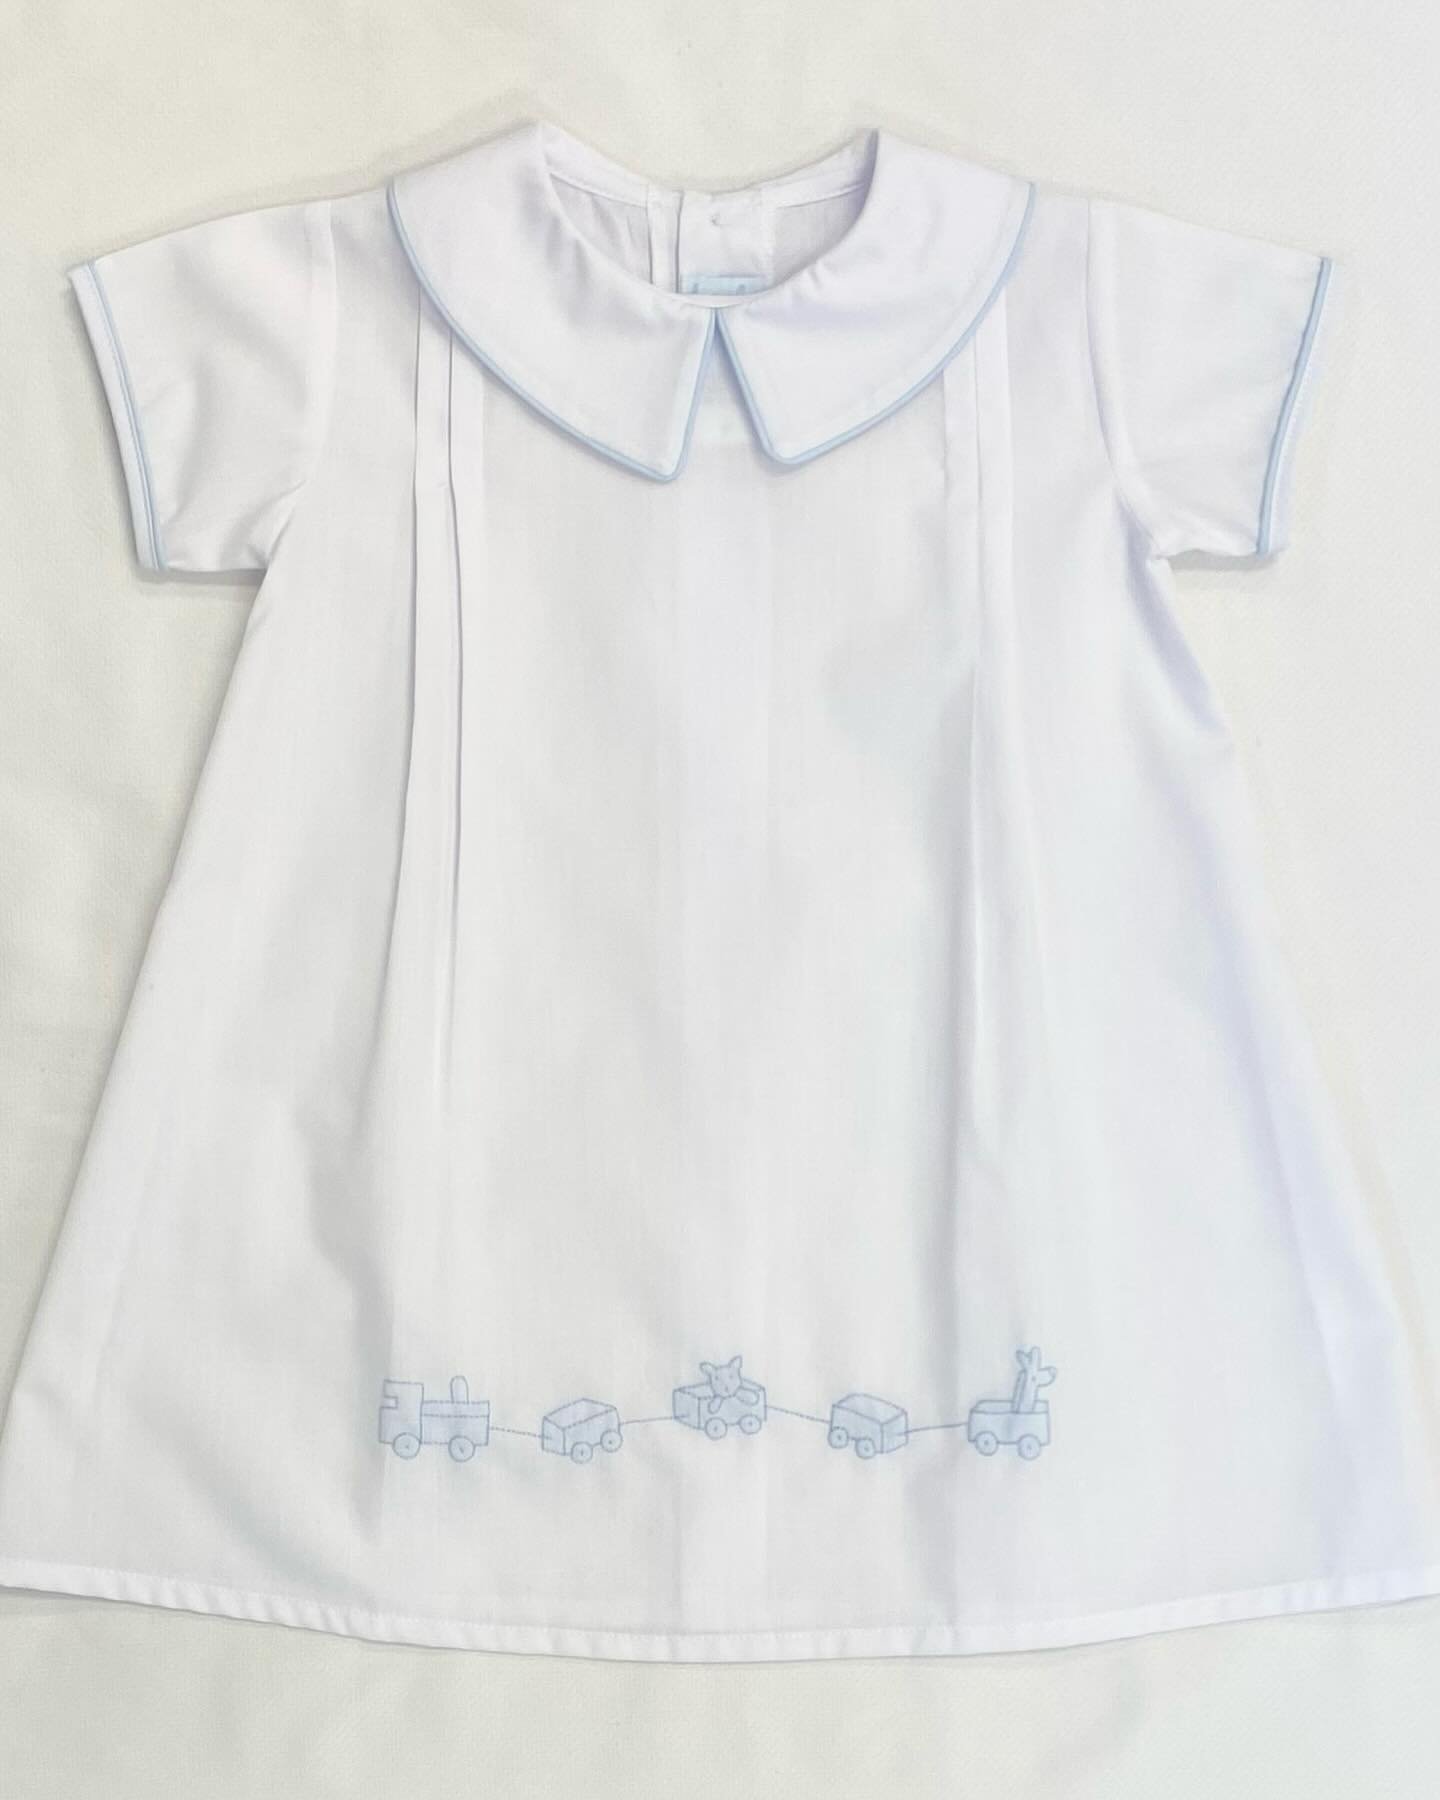 All the sweetness of some new baby boy arrivals&hellip;
(Check out today&rsquo;s story for more!)
@auraluzbaby 
.
.
#childrensshop #childrensshopatl #layette #babyboy #boydaygowns #auraluz #shoplocal